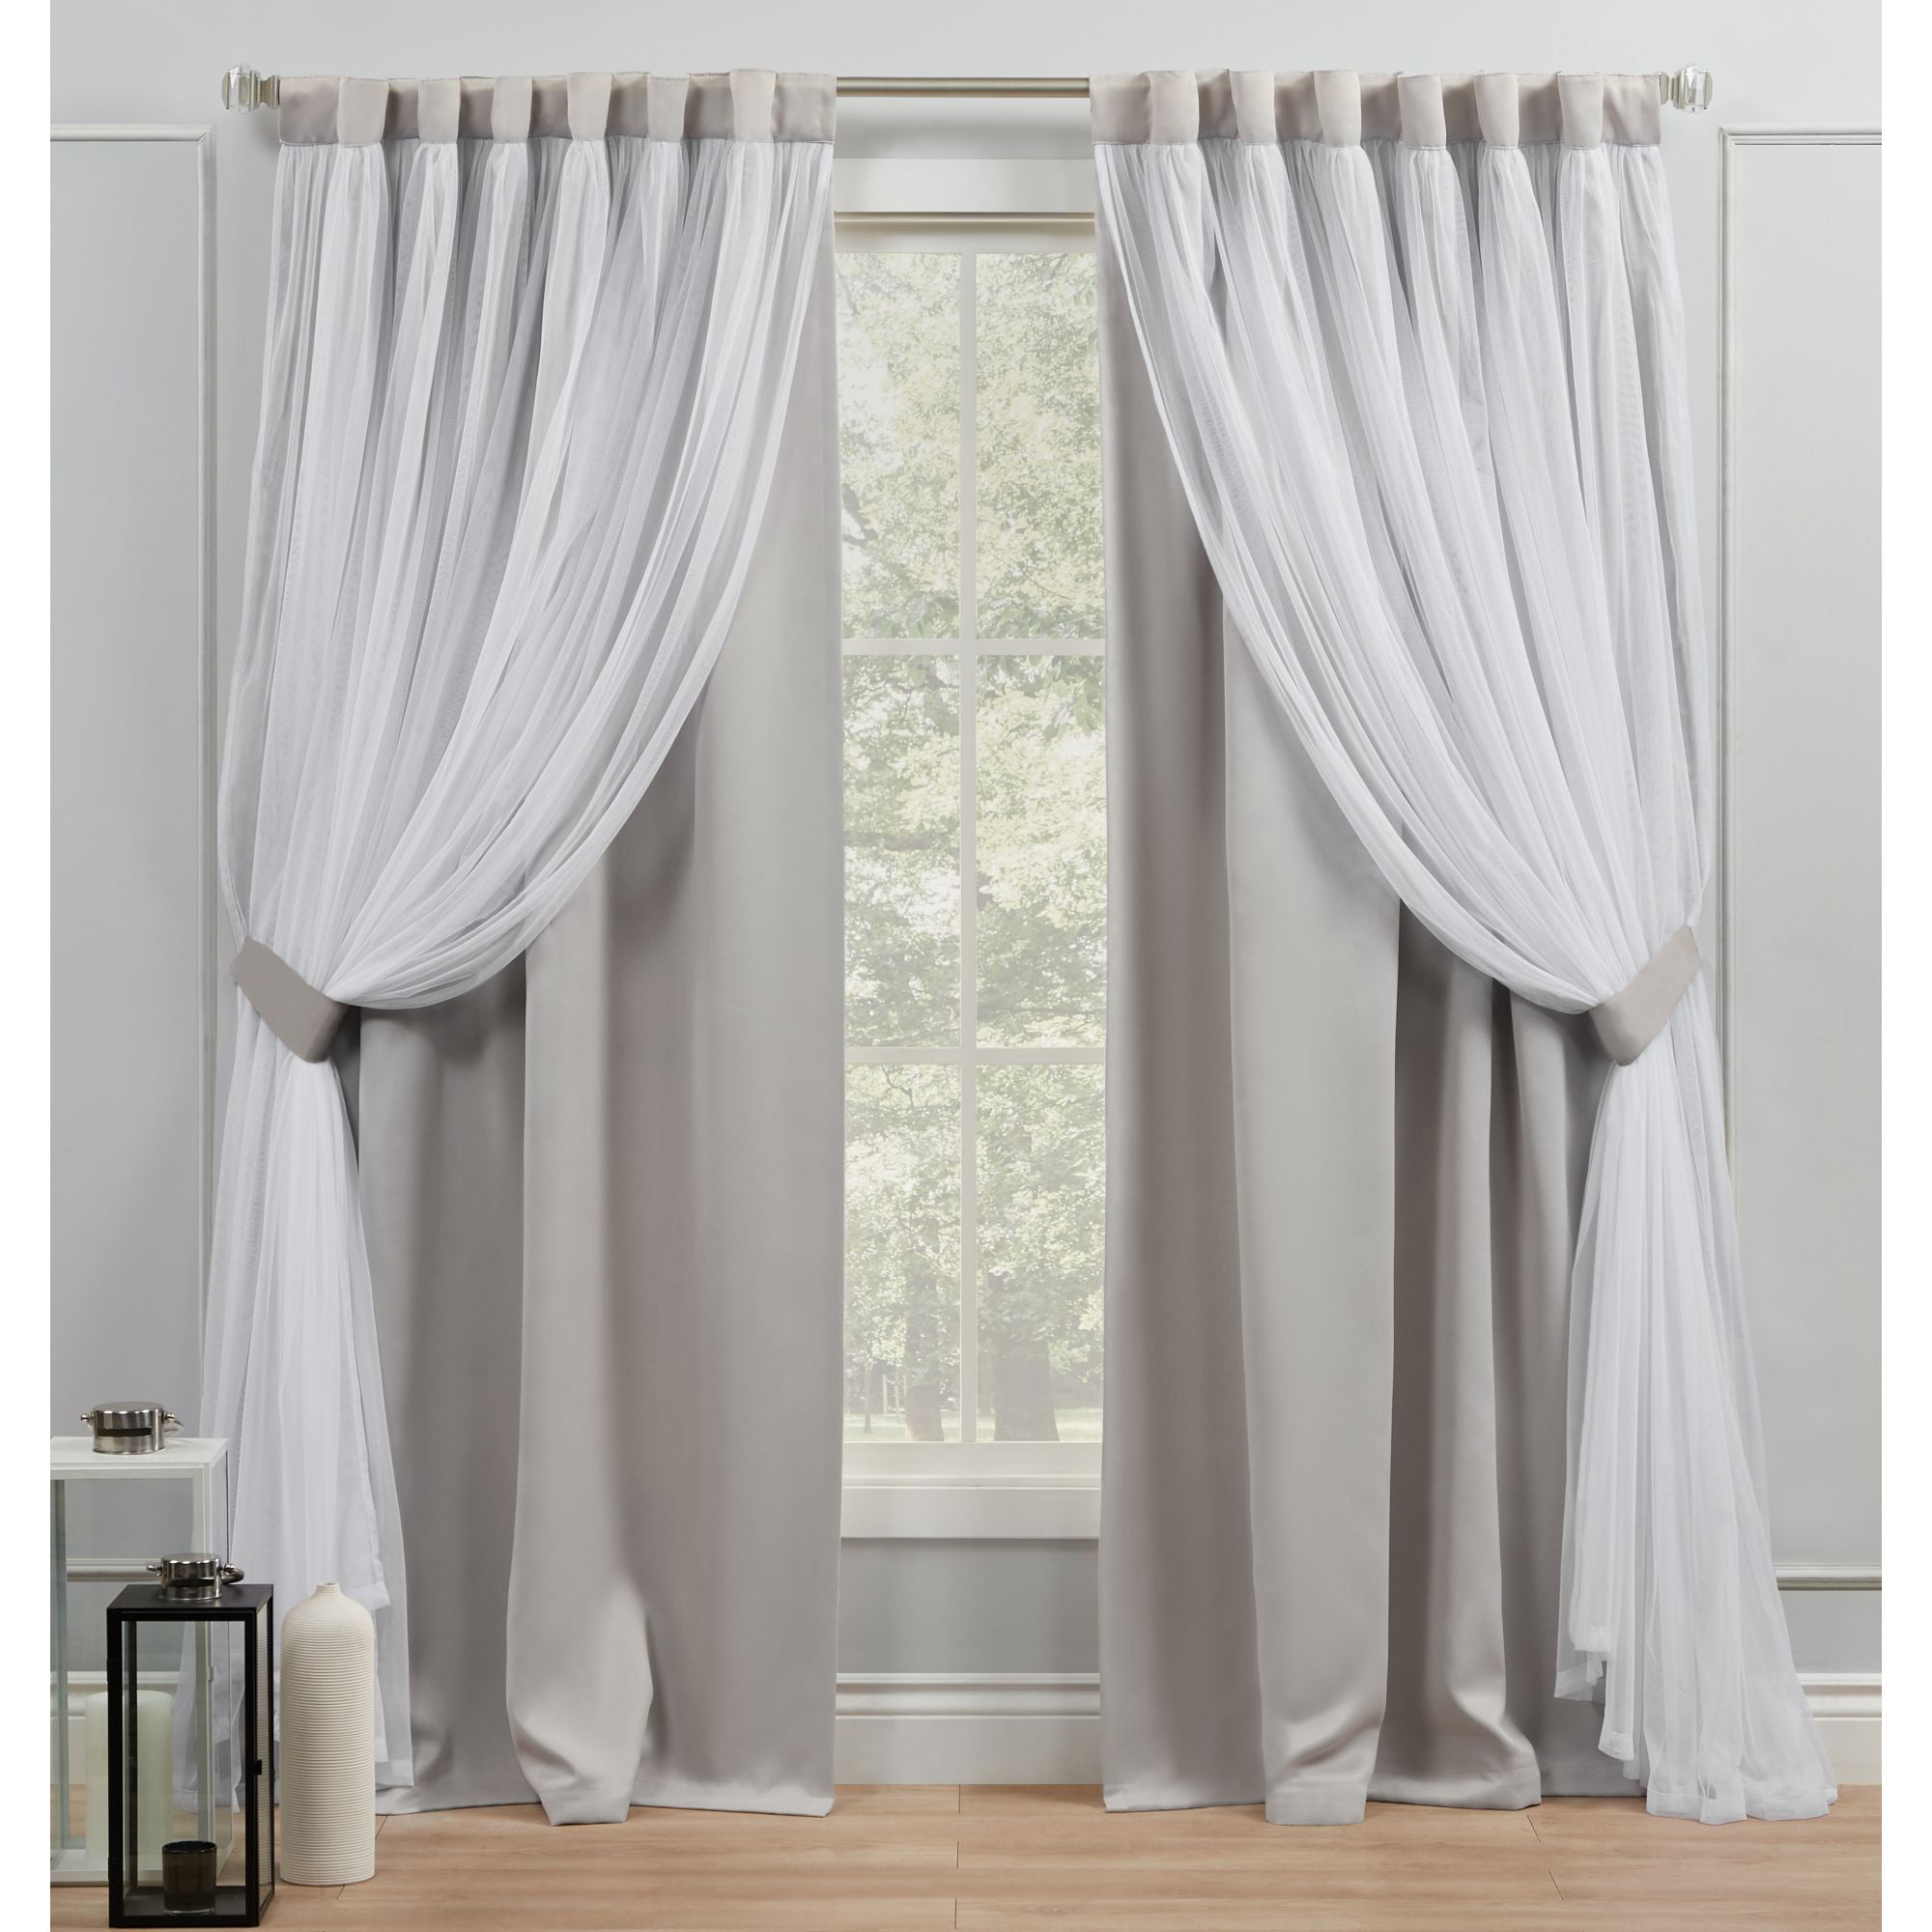 Catarina Layered Solid Blackout and Sheer Window Curtain Panel Pair with Grommet Top 2 Layered Rose Blush, 2PC 52 x 84 ECM